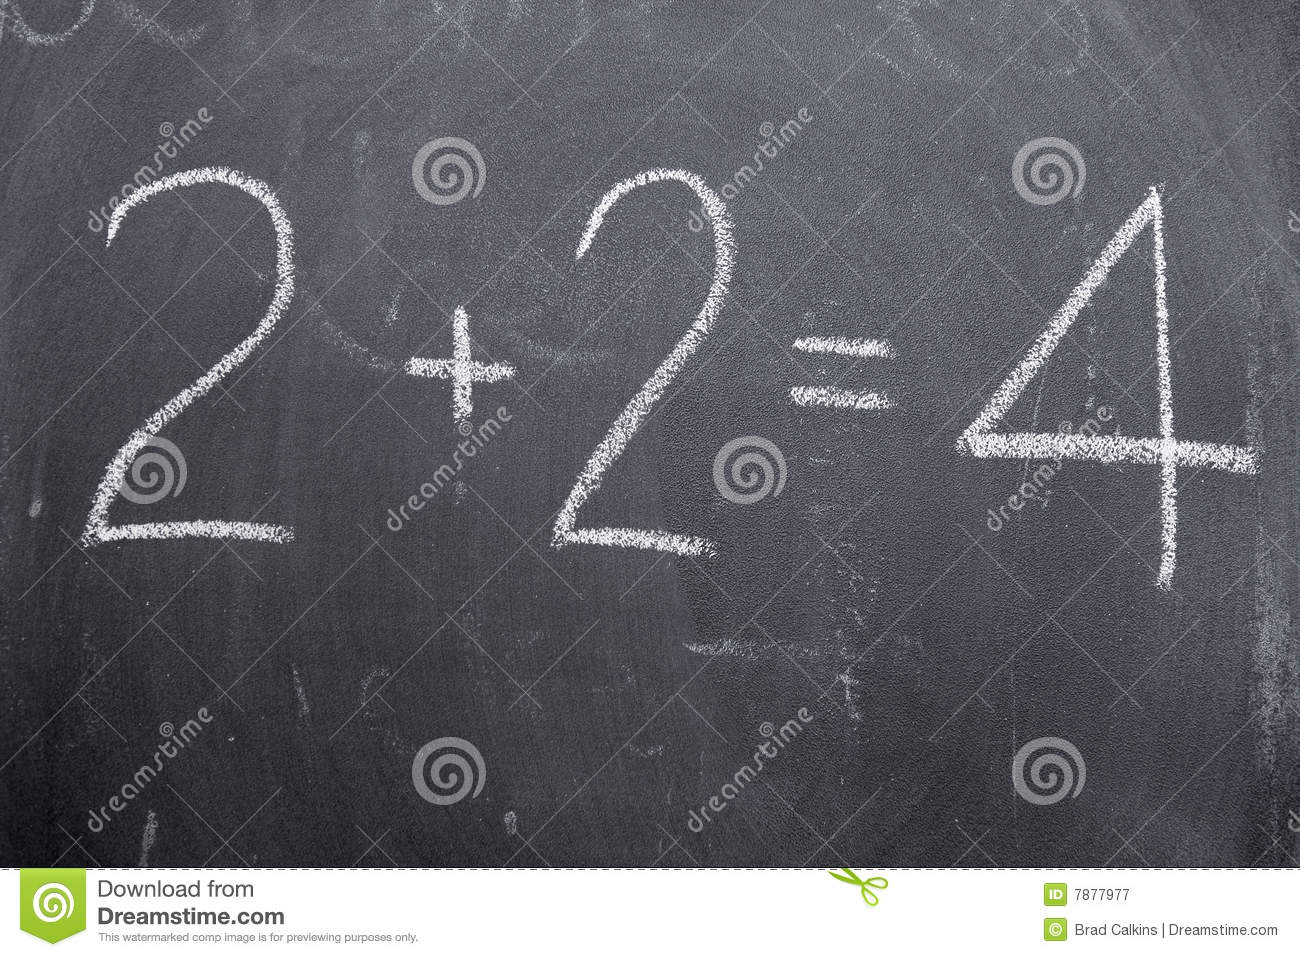 Number Sentence Royalty Free Stock Photography   Image  7877977